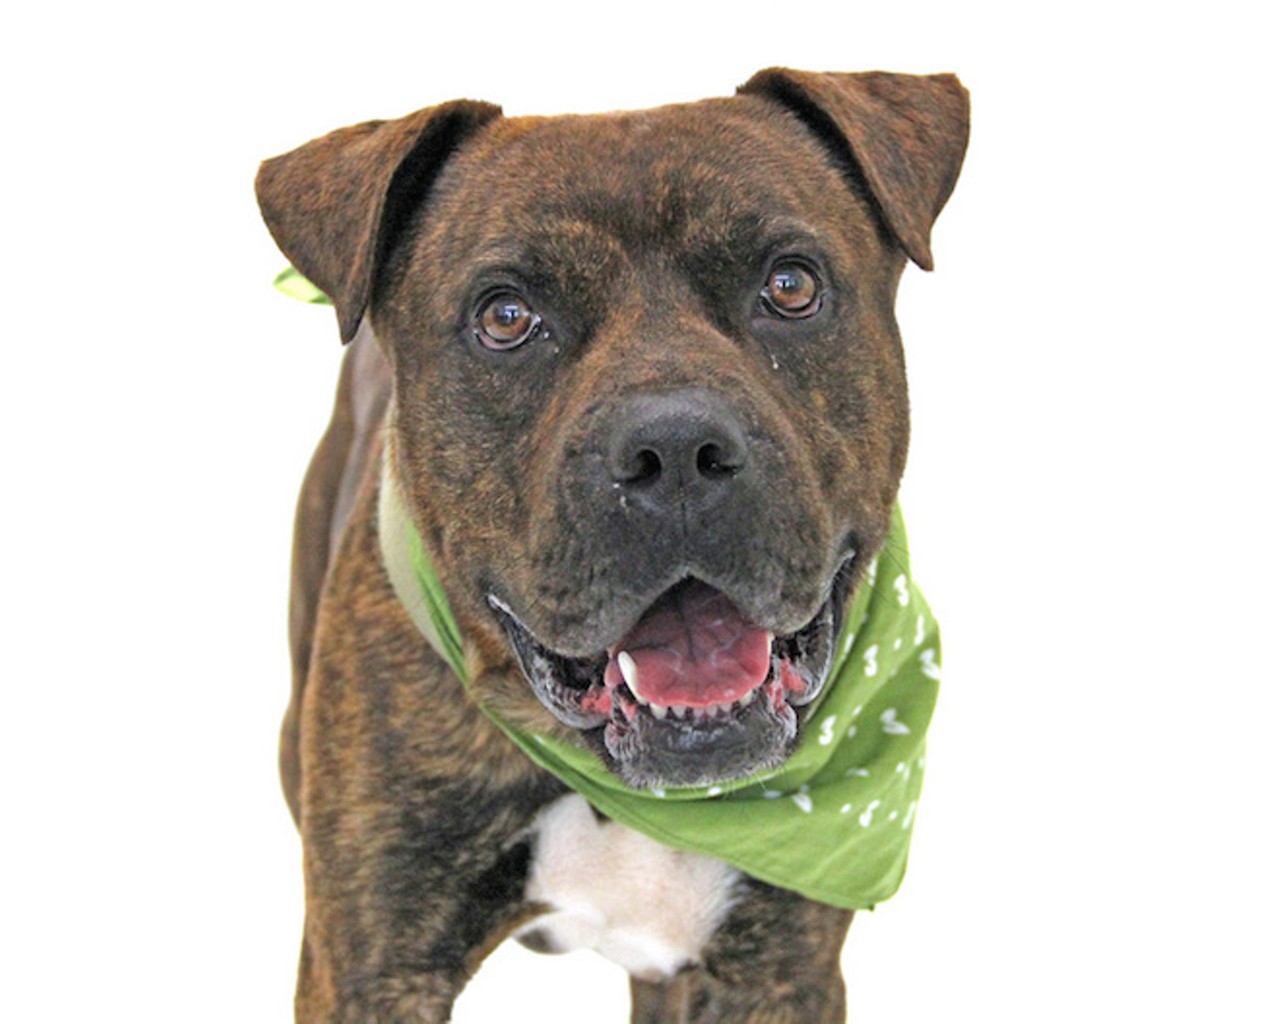 Kiss me, I'm adoptable: 16 adorable dogs looking for homes right now